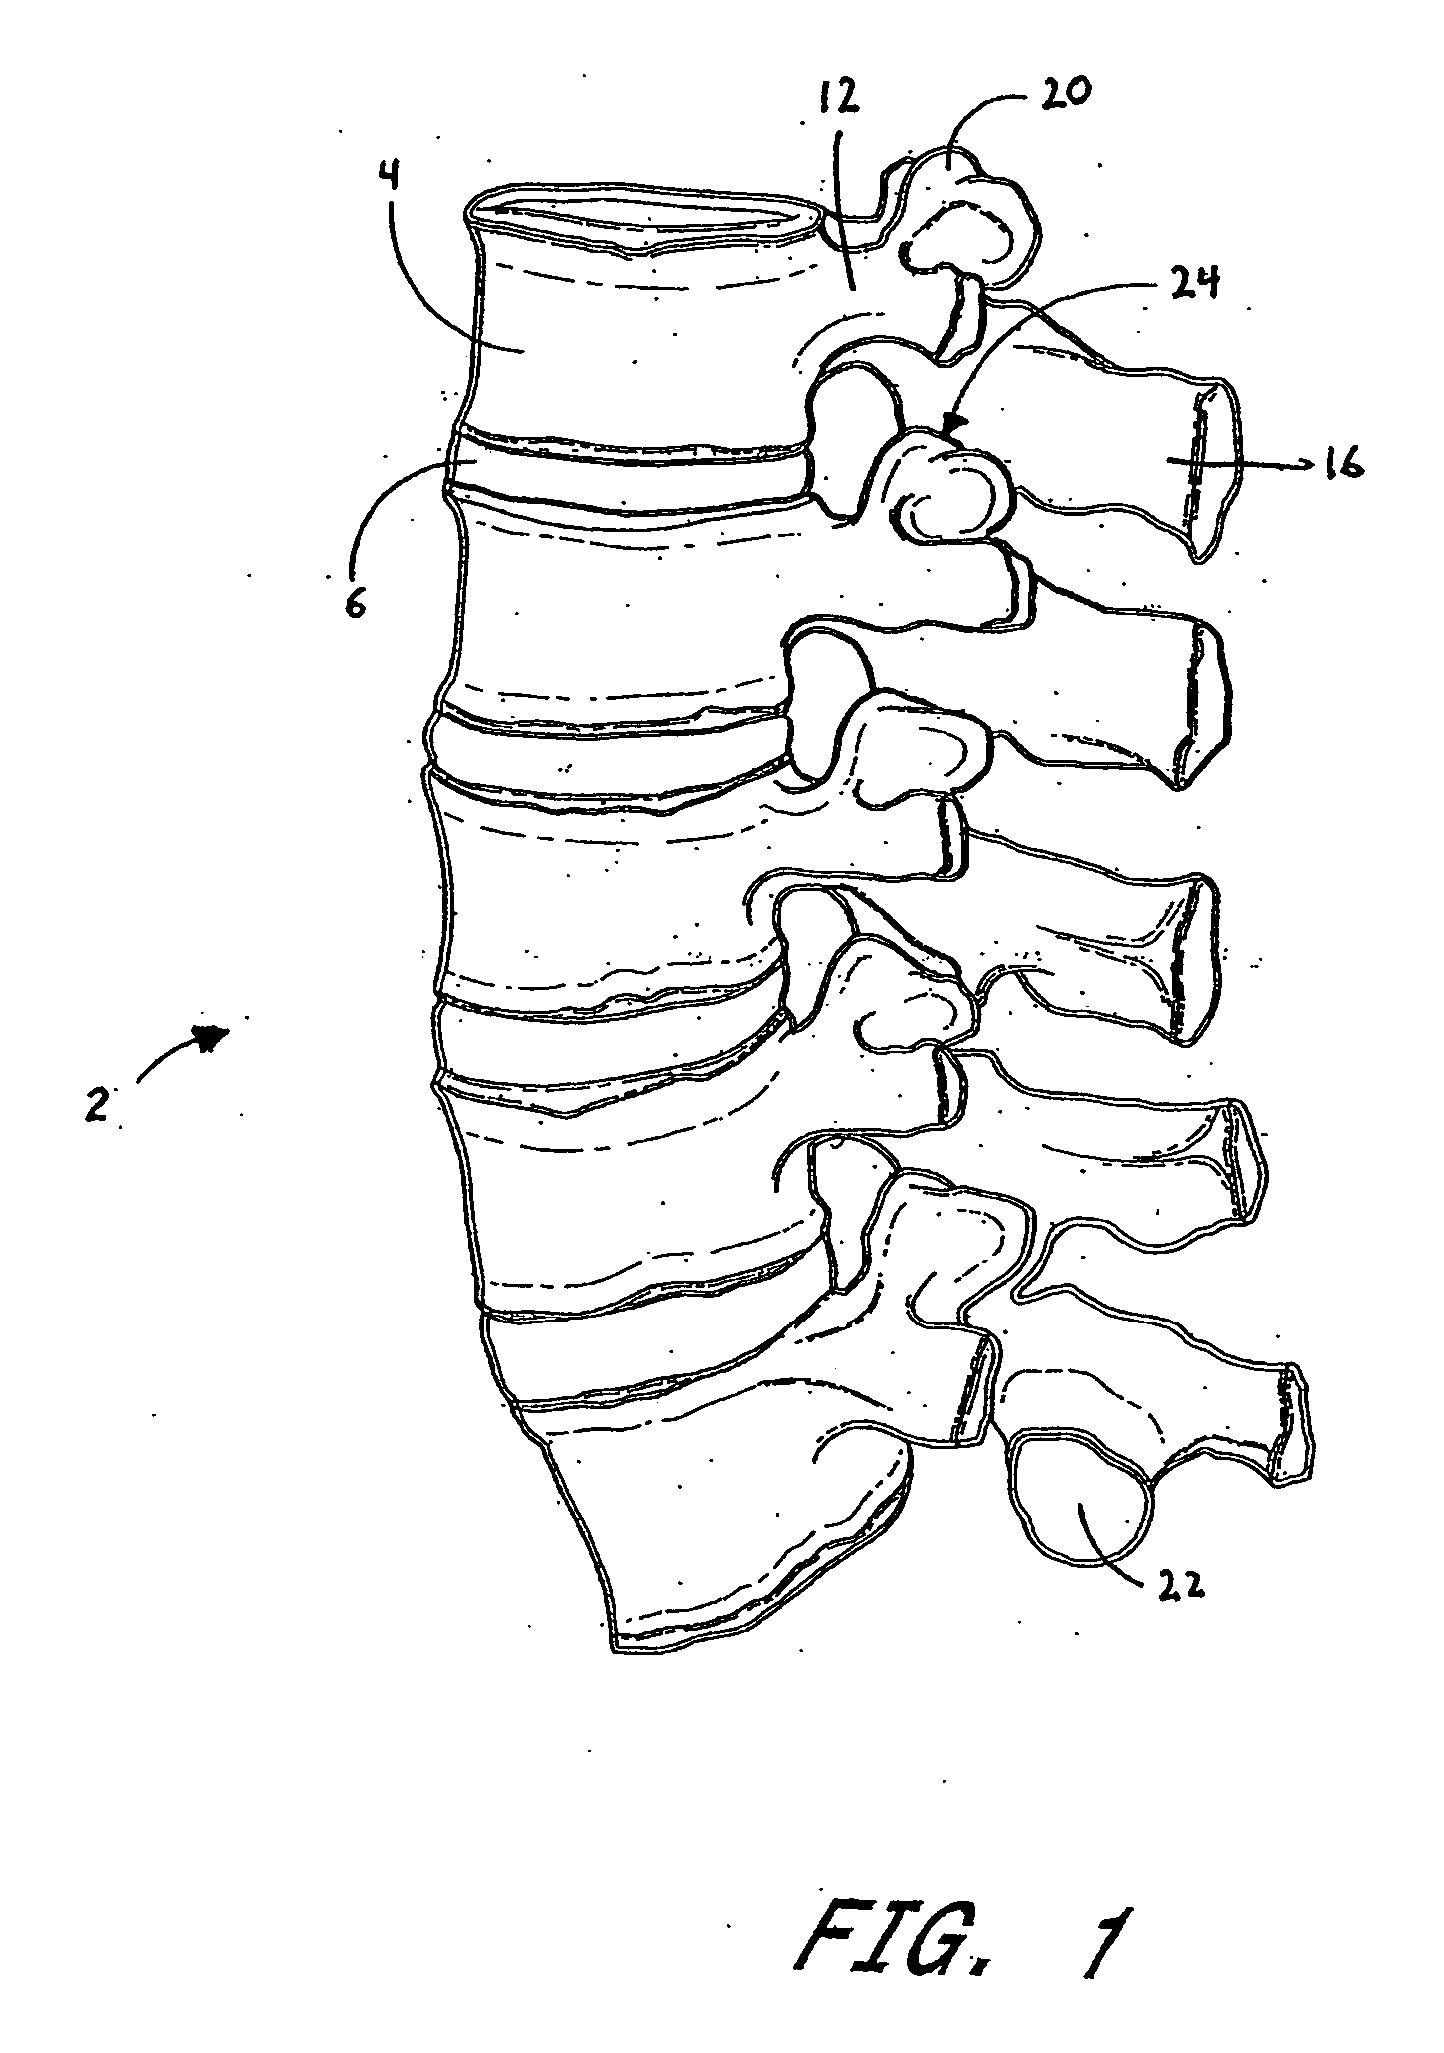 Flanged interbody fusion device with hinge